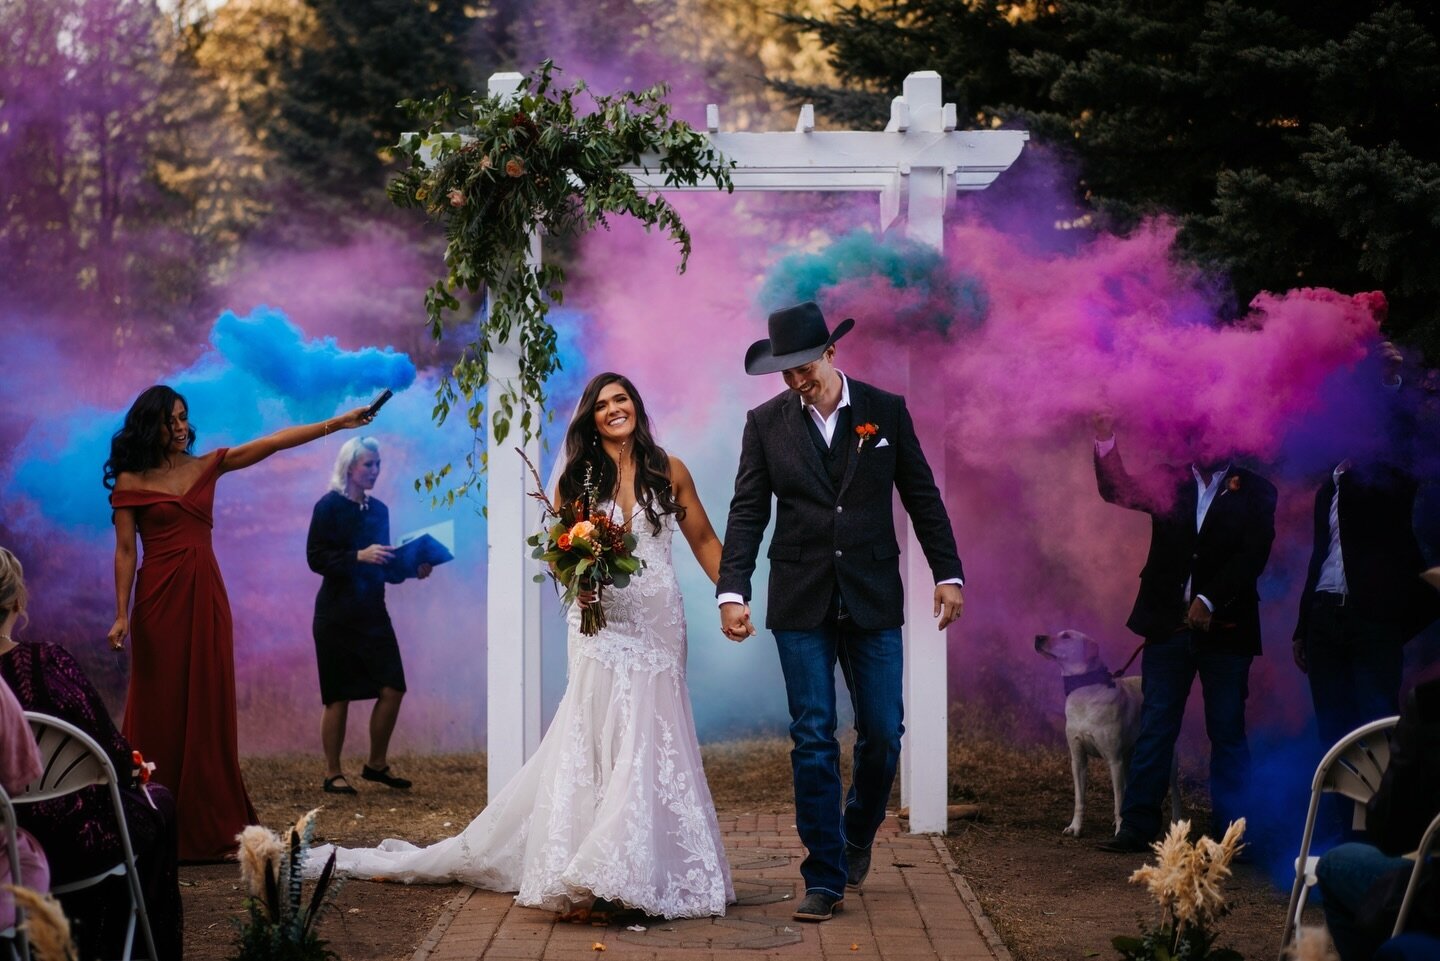 Forever will be my favorite ceremony send off of all time. I love color if you can&rsquo;t tell 🙈
.
More smoke bomb exits at ceremonies please 😍